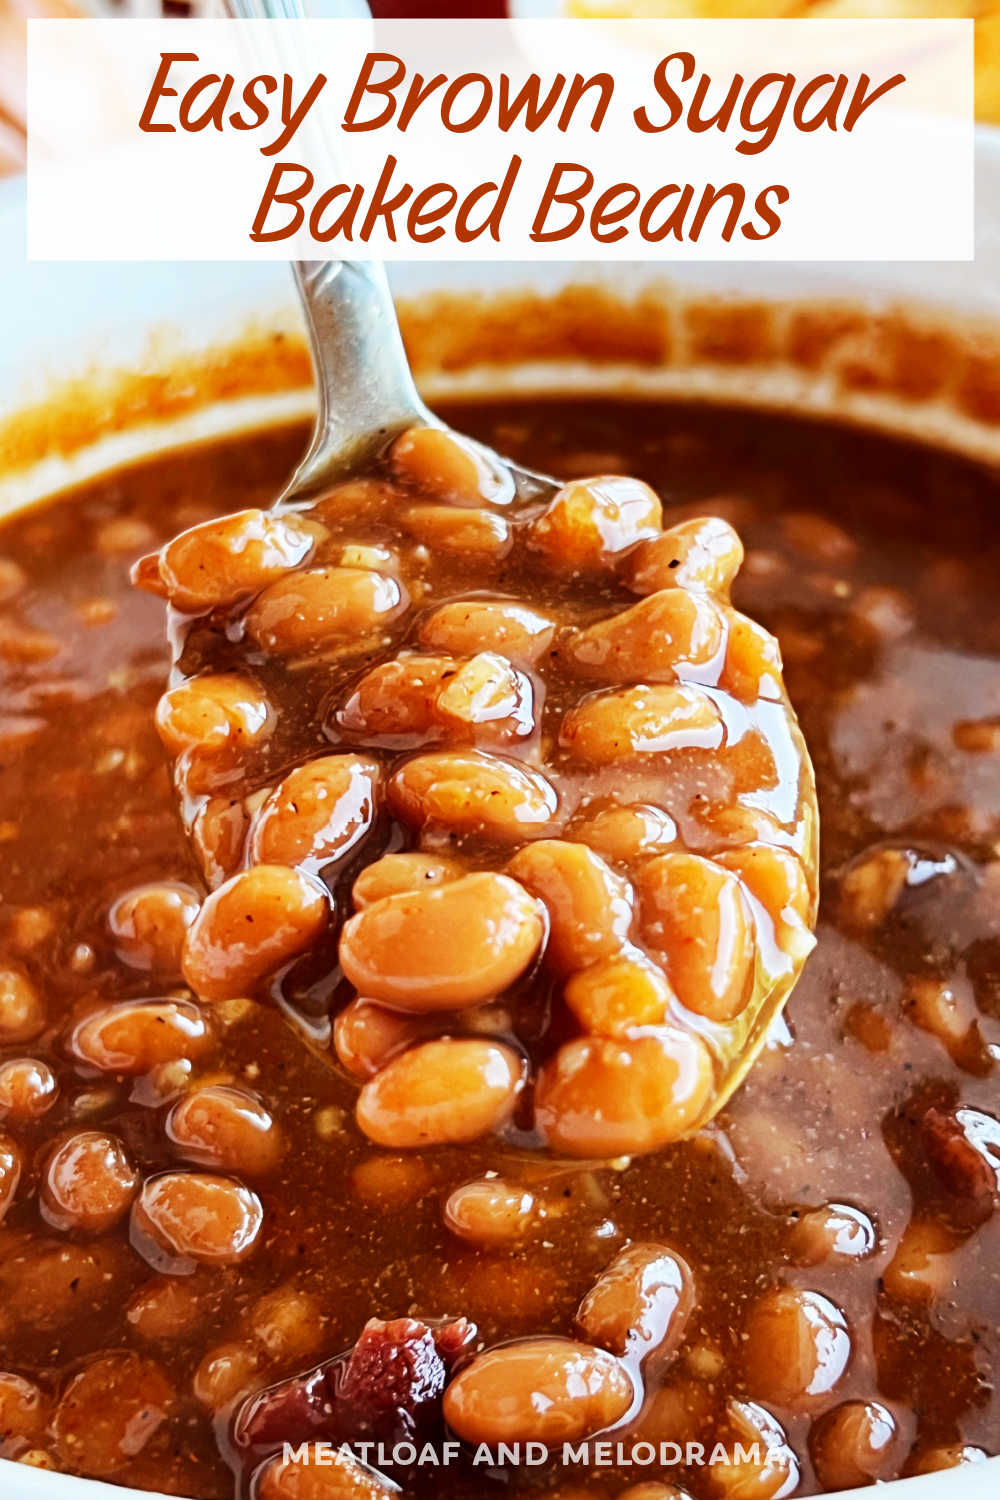 This Easy Baked Beans Recipe with Brown Sugar uses canned beans with  a few simple ingredients added for the perfect side dish in just 5 minutes. Enjoy these brown sugar baked beans at every cookout all summer long! via @meamel